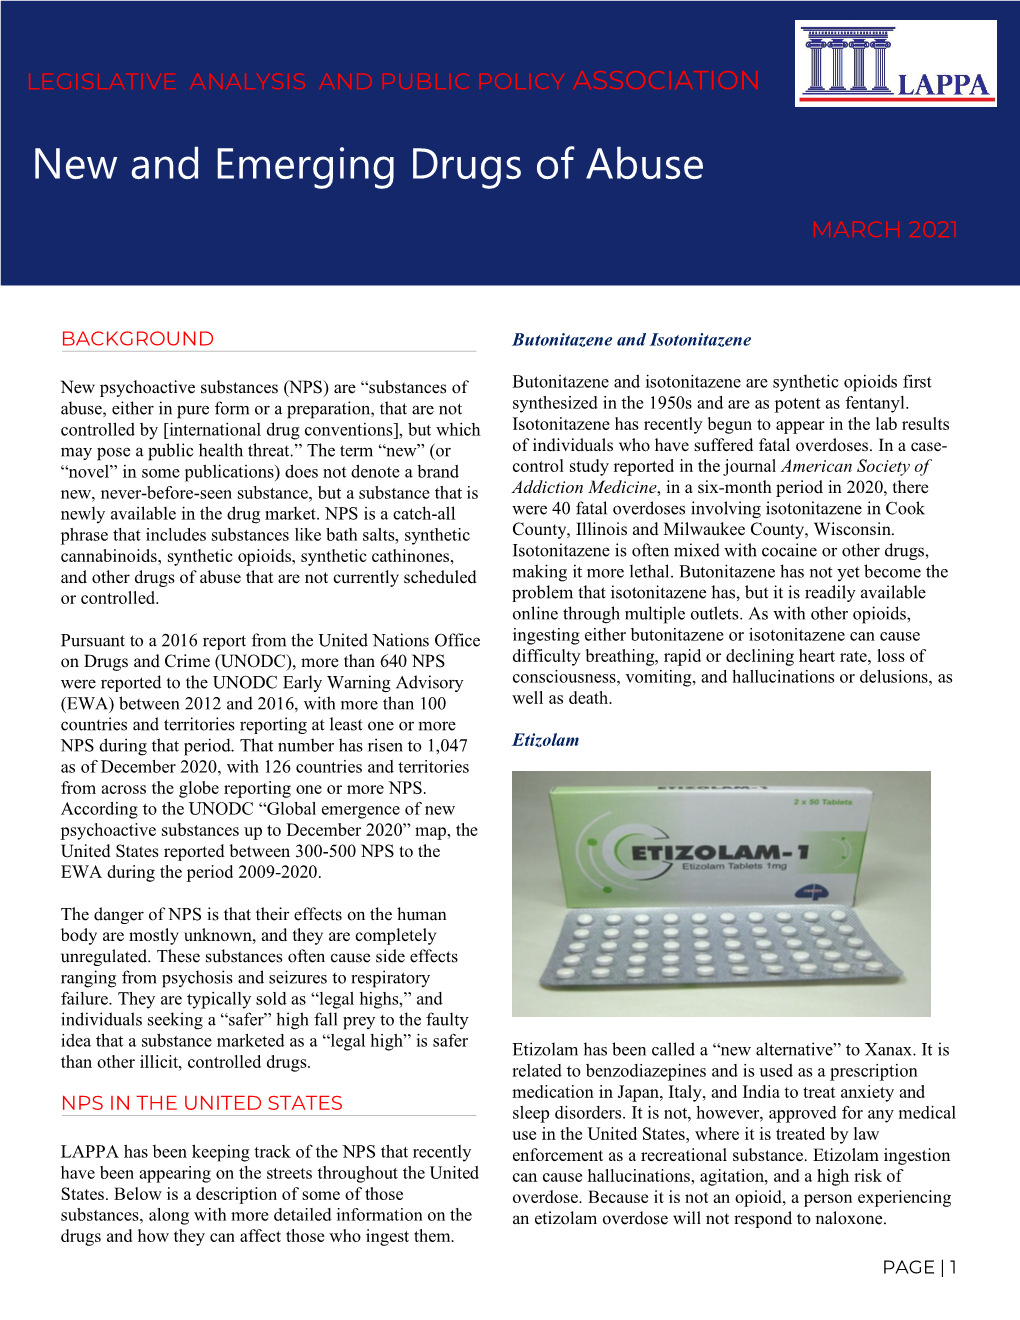 New and Emerging Drugs of Abuse Fact Sheet